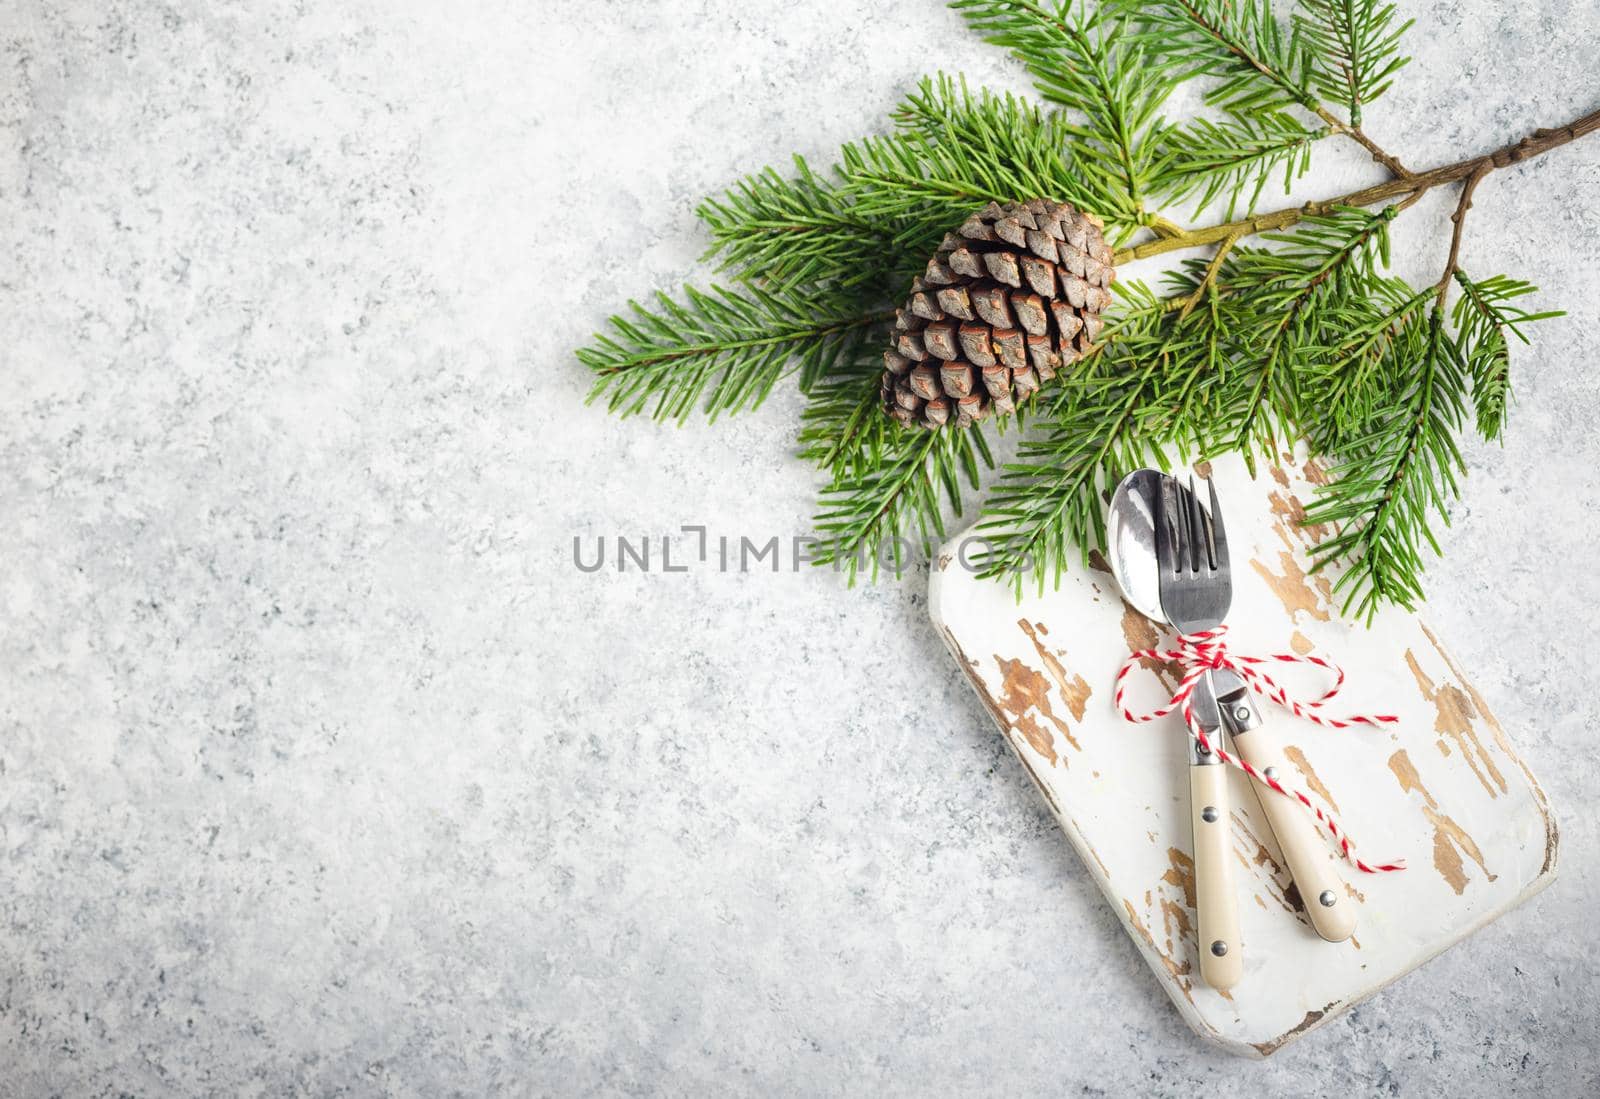 Christmas/New Year background. Christmas table place setting. Festive dinner background. Spoon, fork, fir branch on white concrete background. Christmas decoration. Space for text. Top view. Holidays